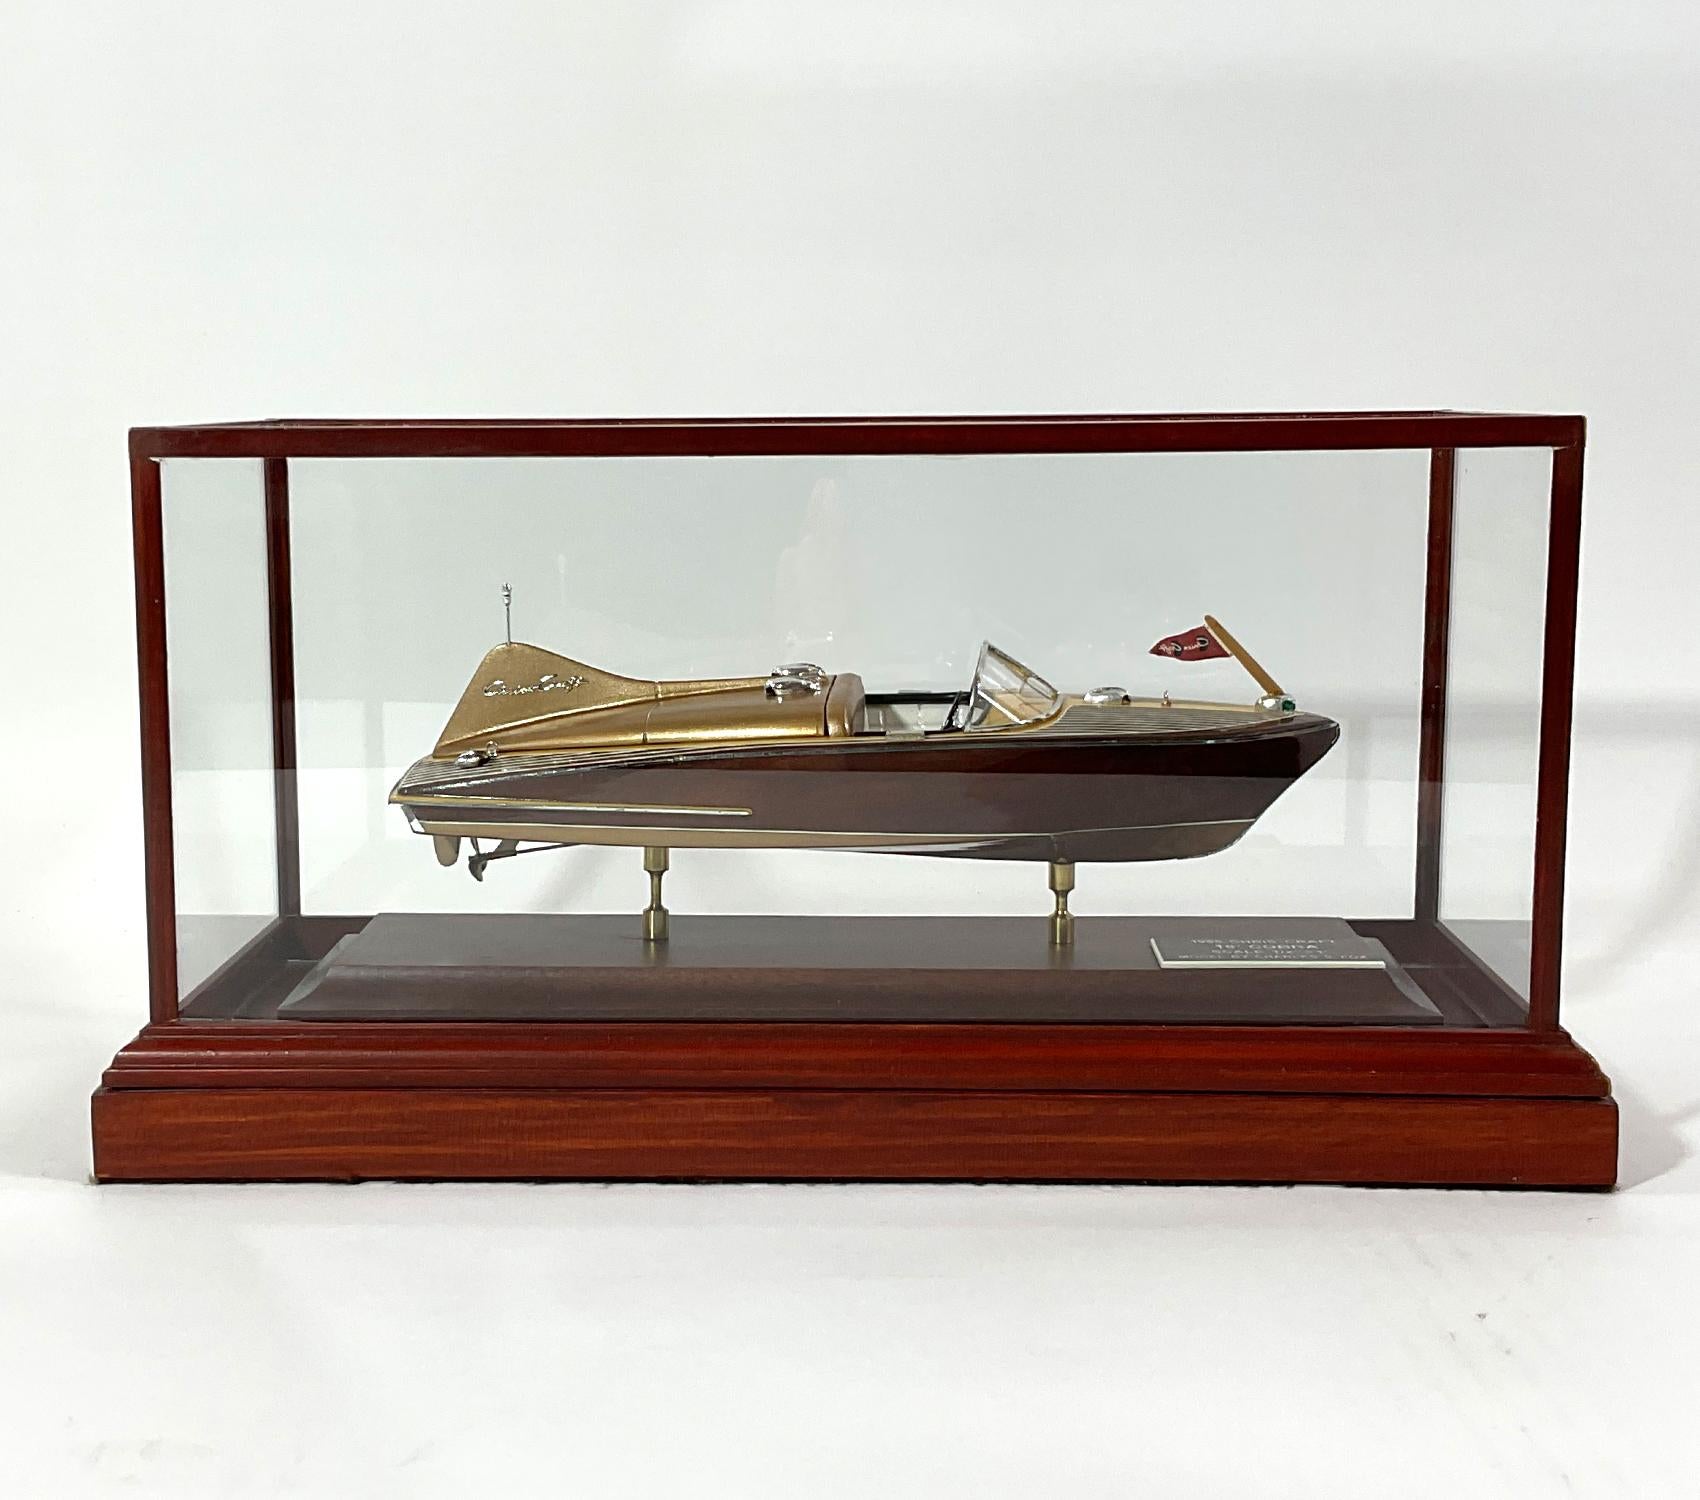 Charles S. Fox model of a 1955 Chris Craft Cobra. This is a superb little model makers by one of the late twentieth century. Famous for his work on coast guard vessels. This was a side project of his passion. This is a perfectly scaled recreation of